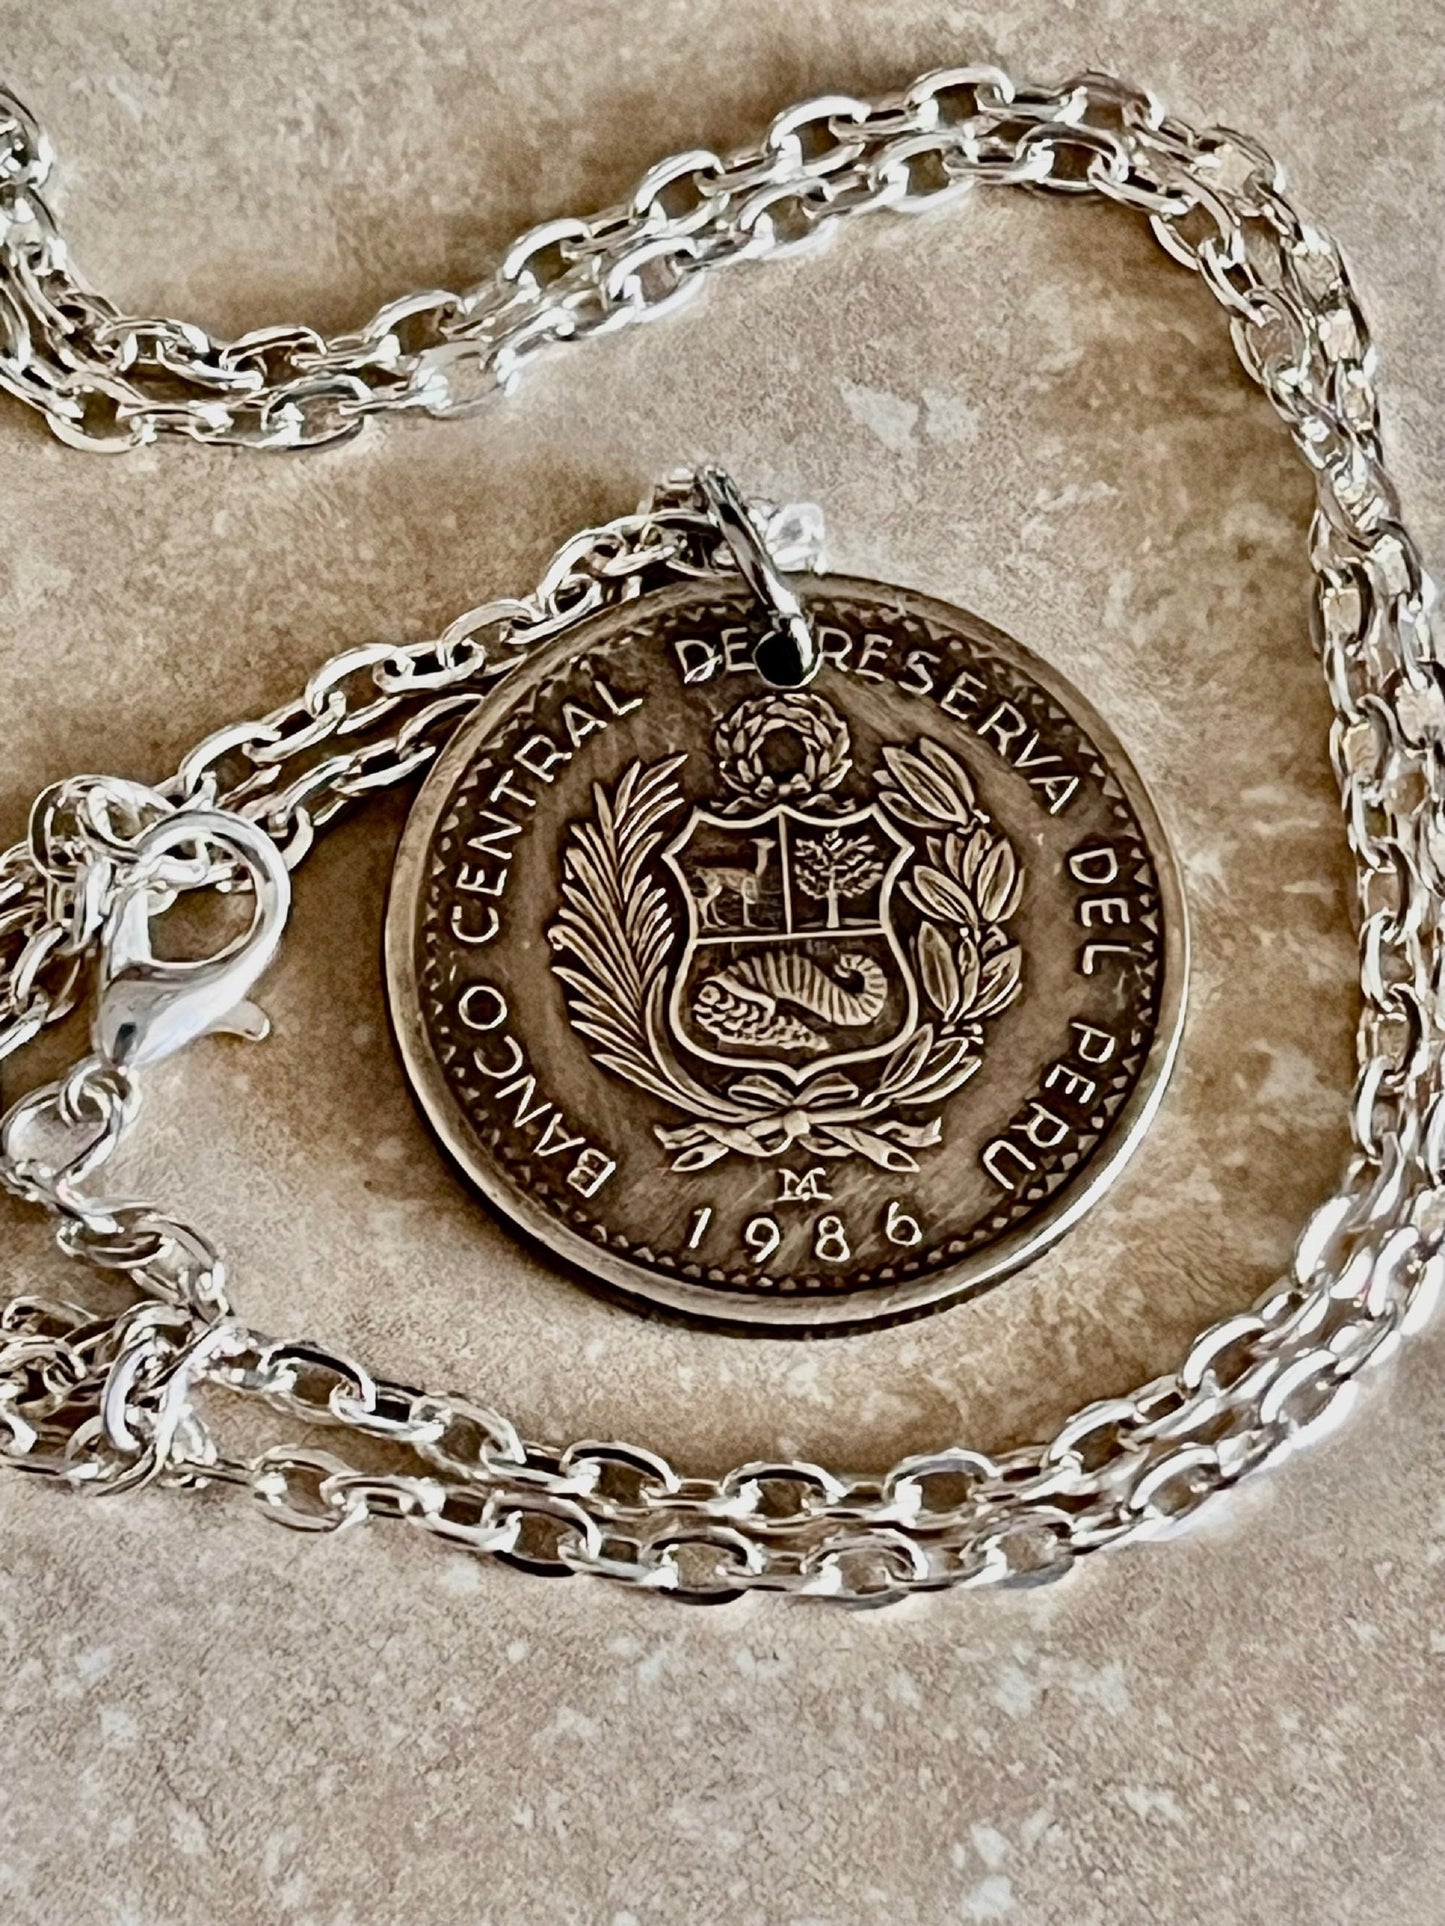 Peru Coin Pendant Peruvian Cinco Intis Personal Necklace Old Vintage Handmade Jewelry Gift Friend Charm For Him Her World Coin Collector